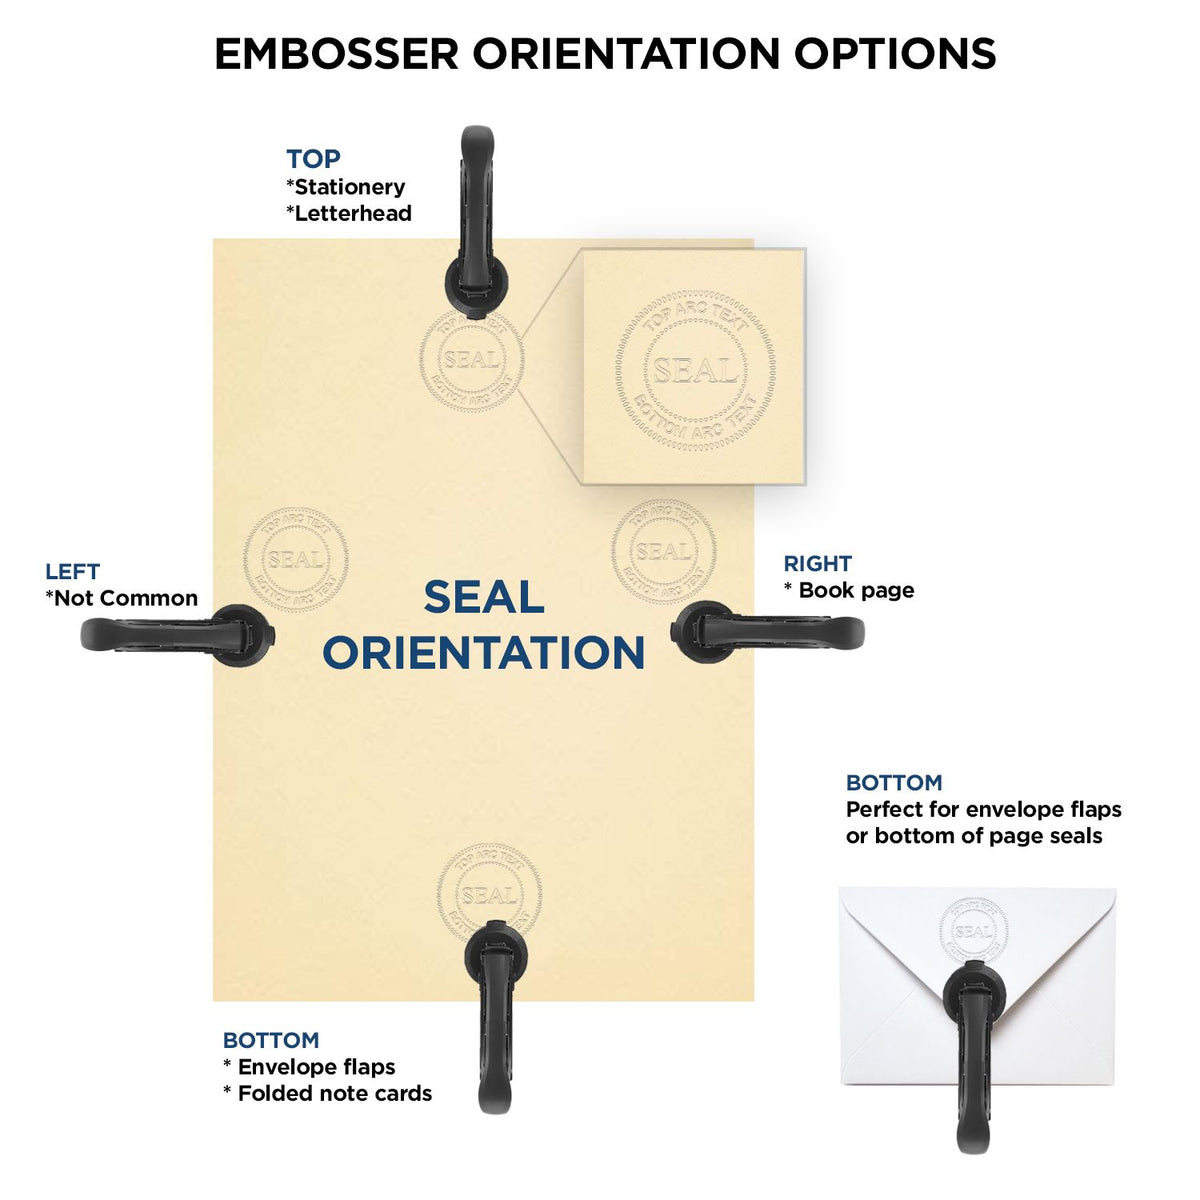 An infographic for the Handheld Minnesota Professional Engineer Embosser showing embosser orientation, this is showing examples of a top, bottom, right and left insert.